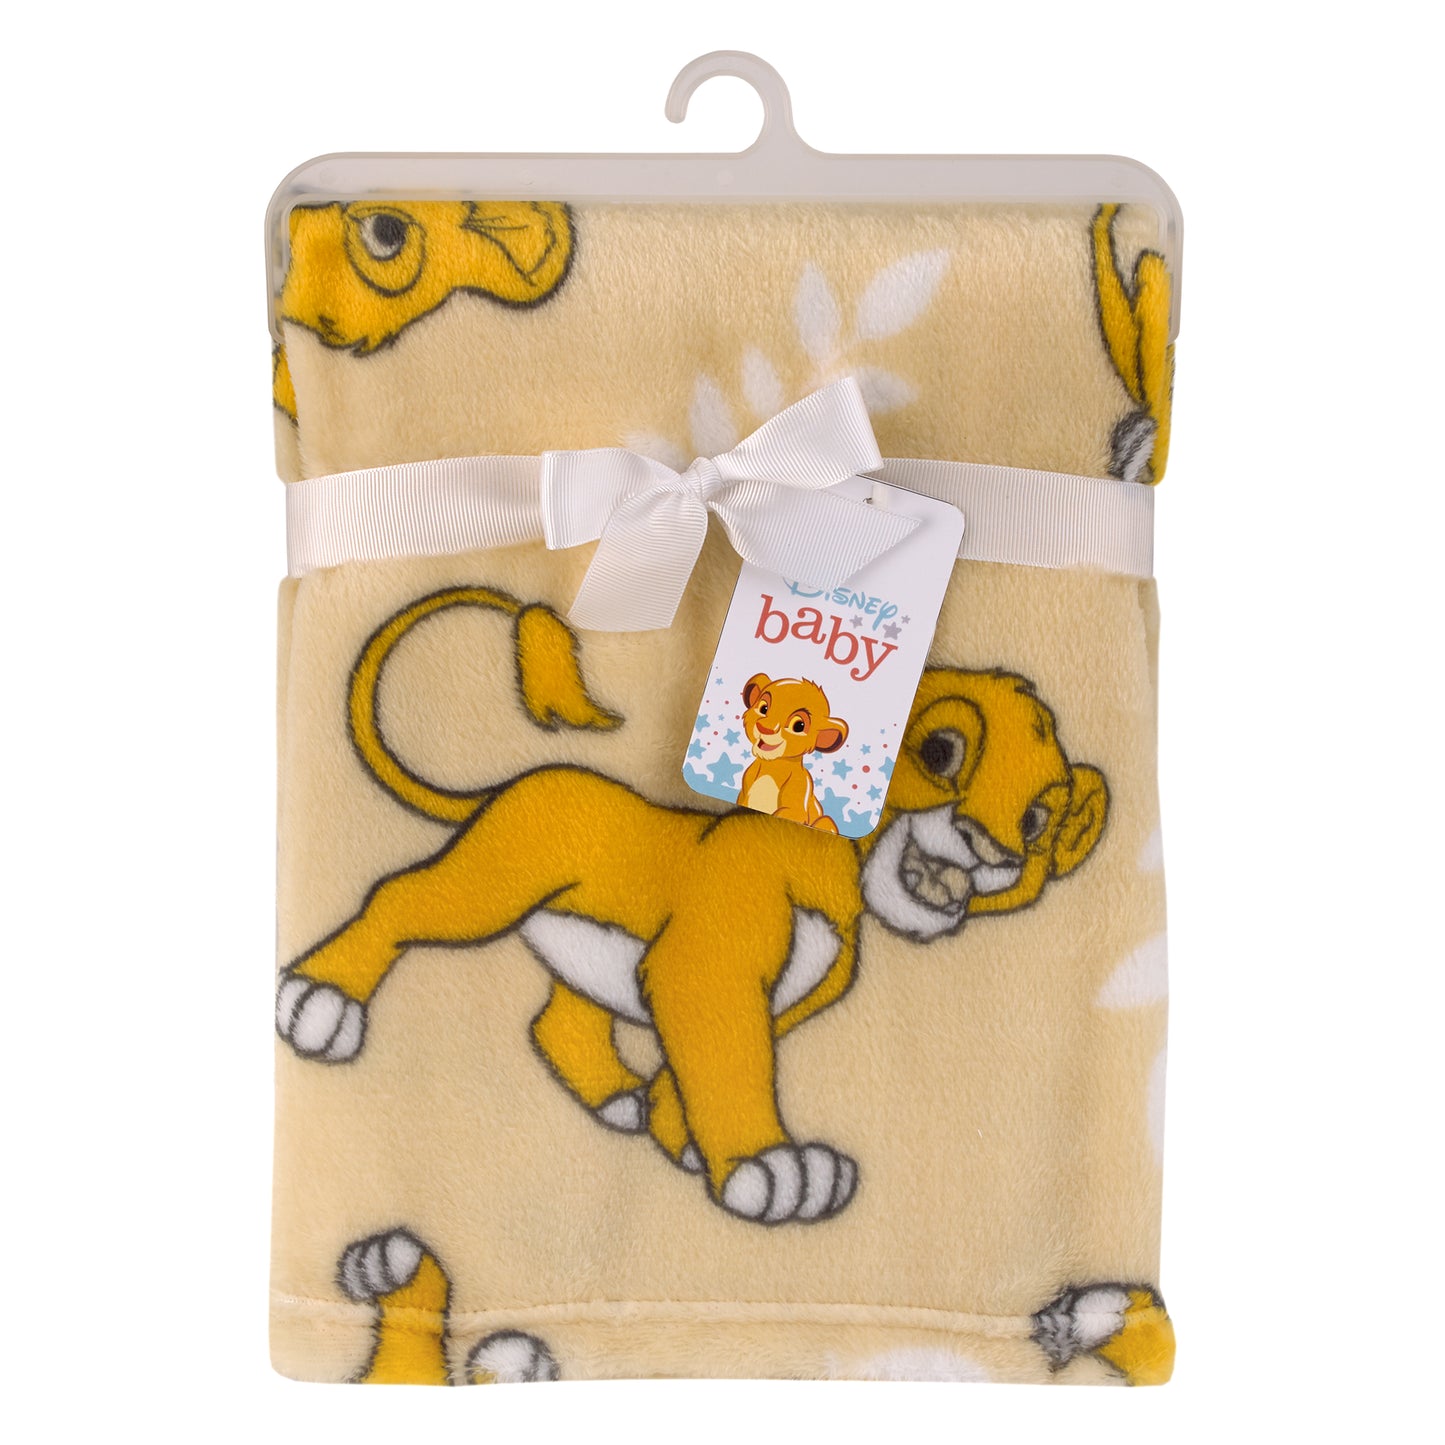 Disney Lion King Tan, Beige and White Simba Super Soft Baby Blanket